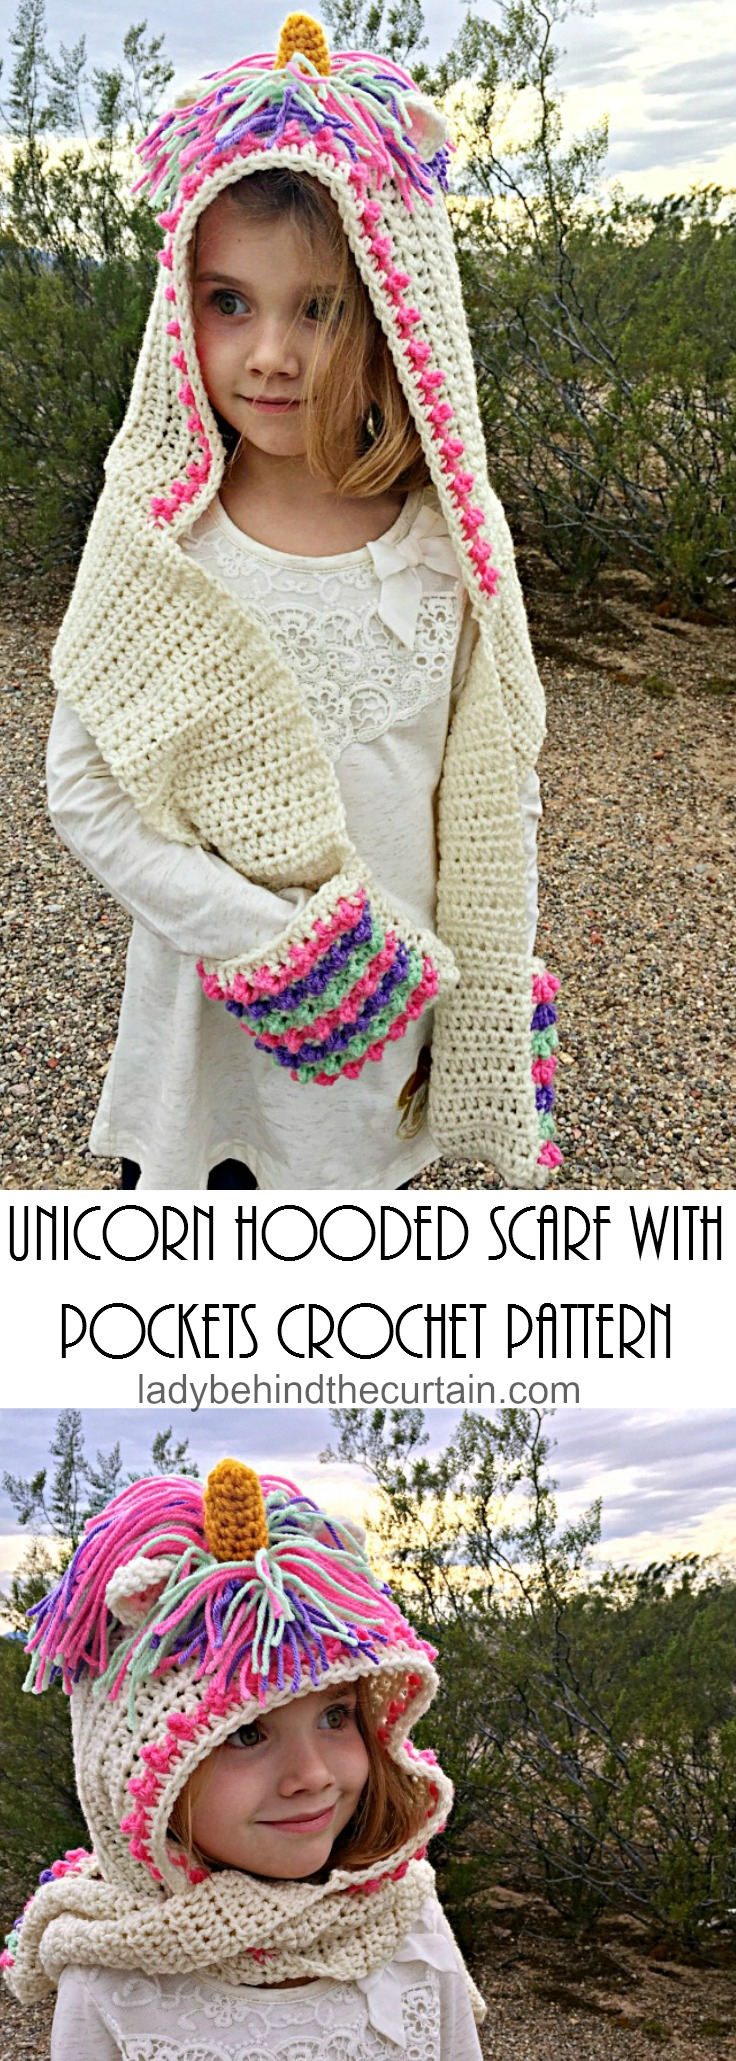 Knitted Hooded Scarf With Pockets Pattern Unicorn Hooded Scarf With Pockets Crochet Pattern